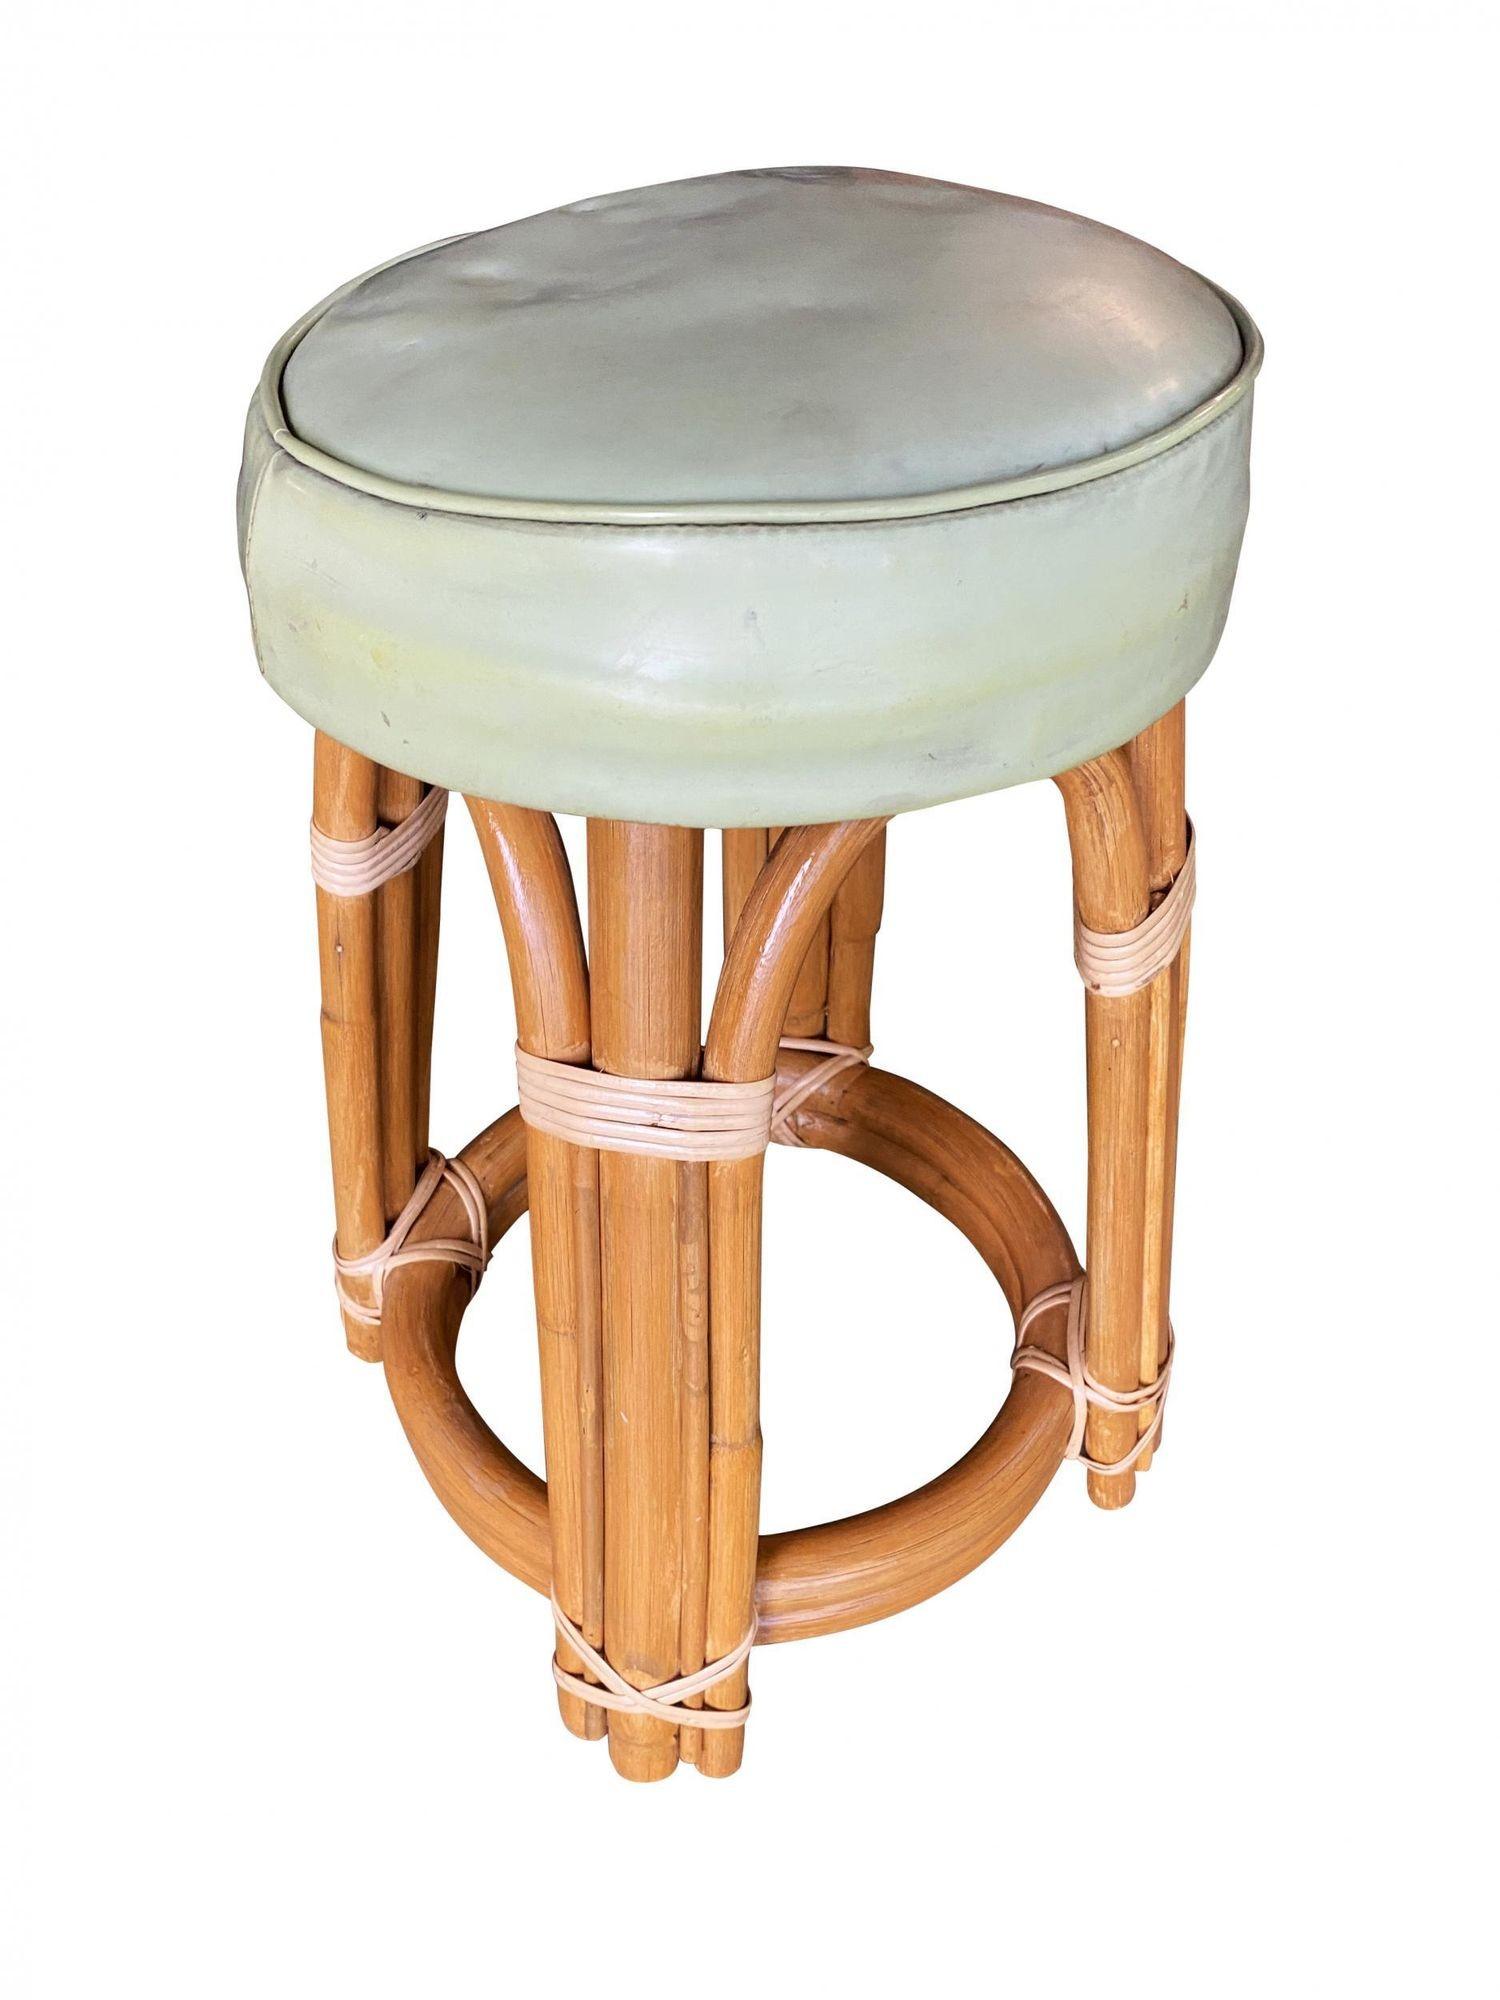 American Restored Single Stand Arched Rattan Vanity Stool W/ Teal Seat For Sale